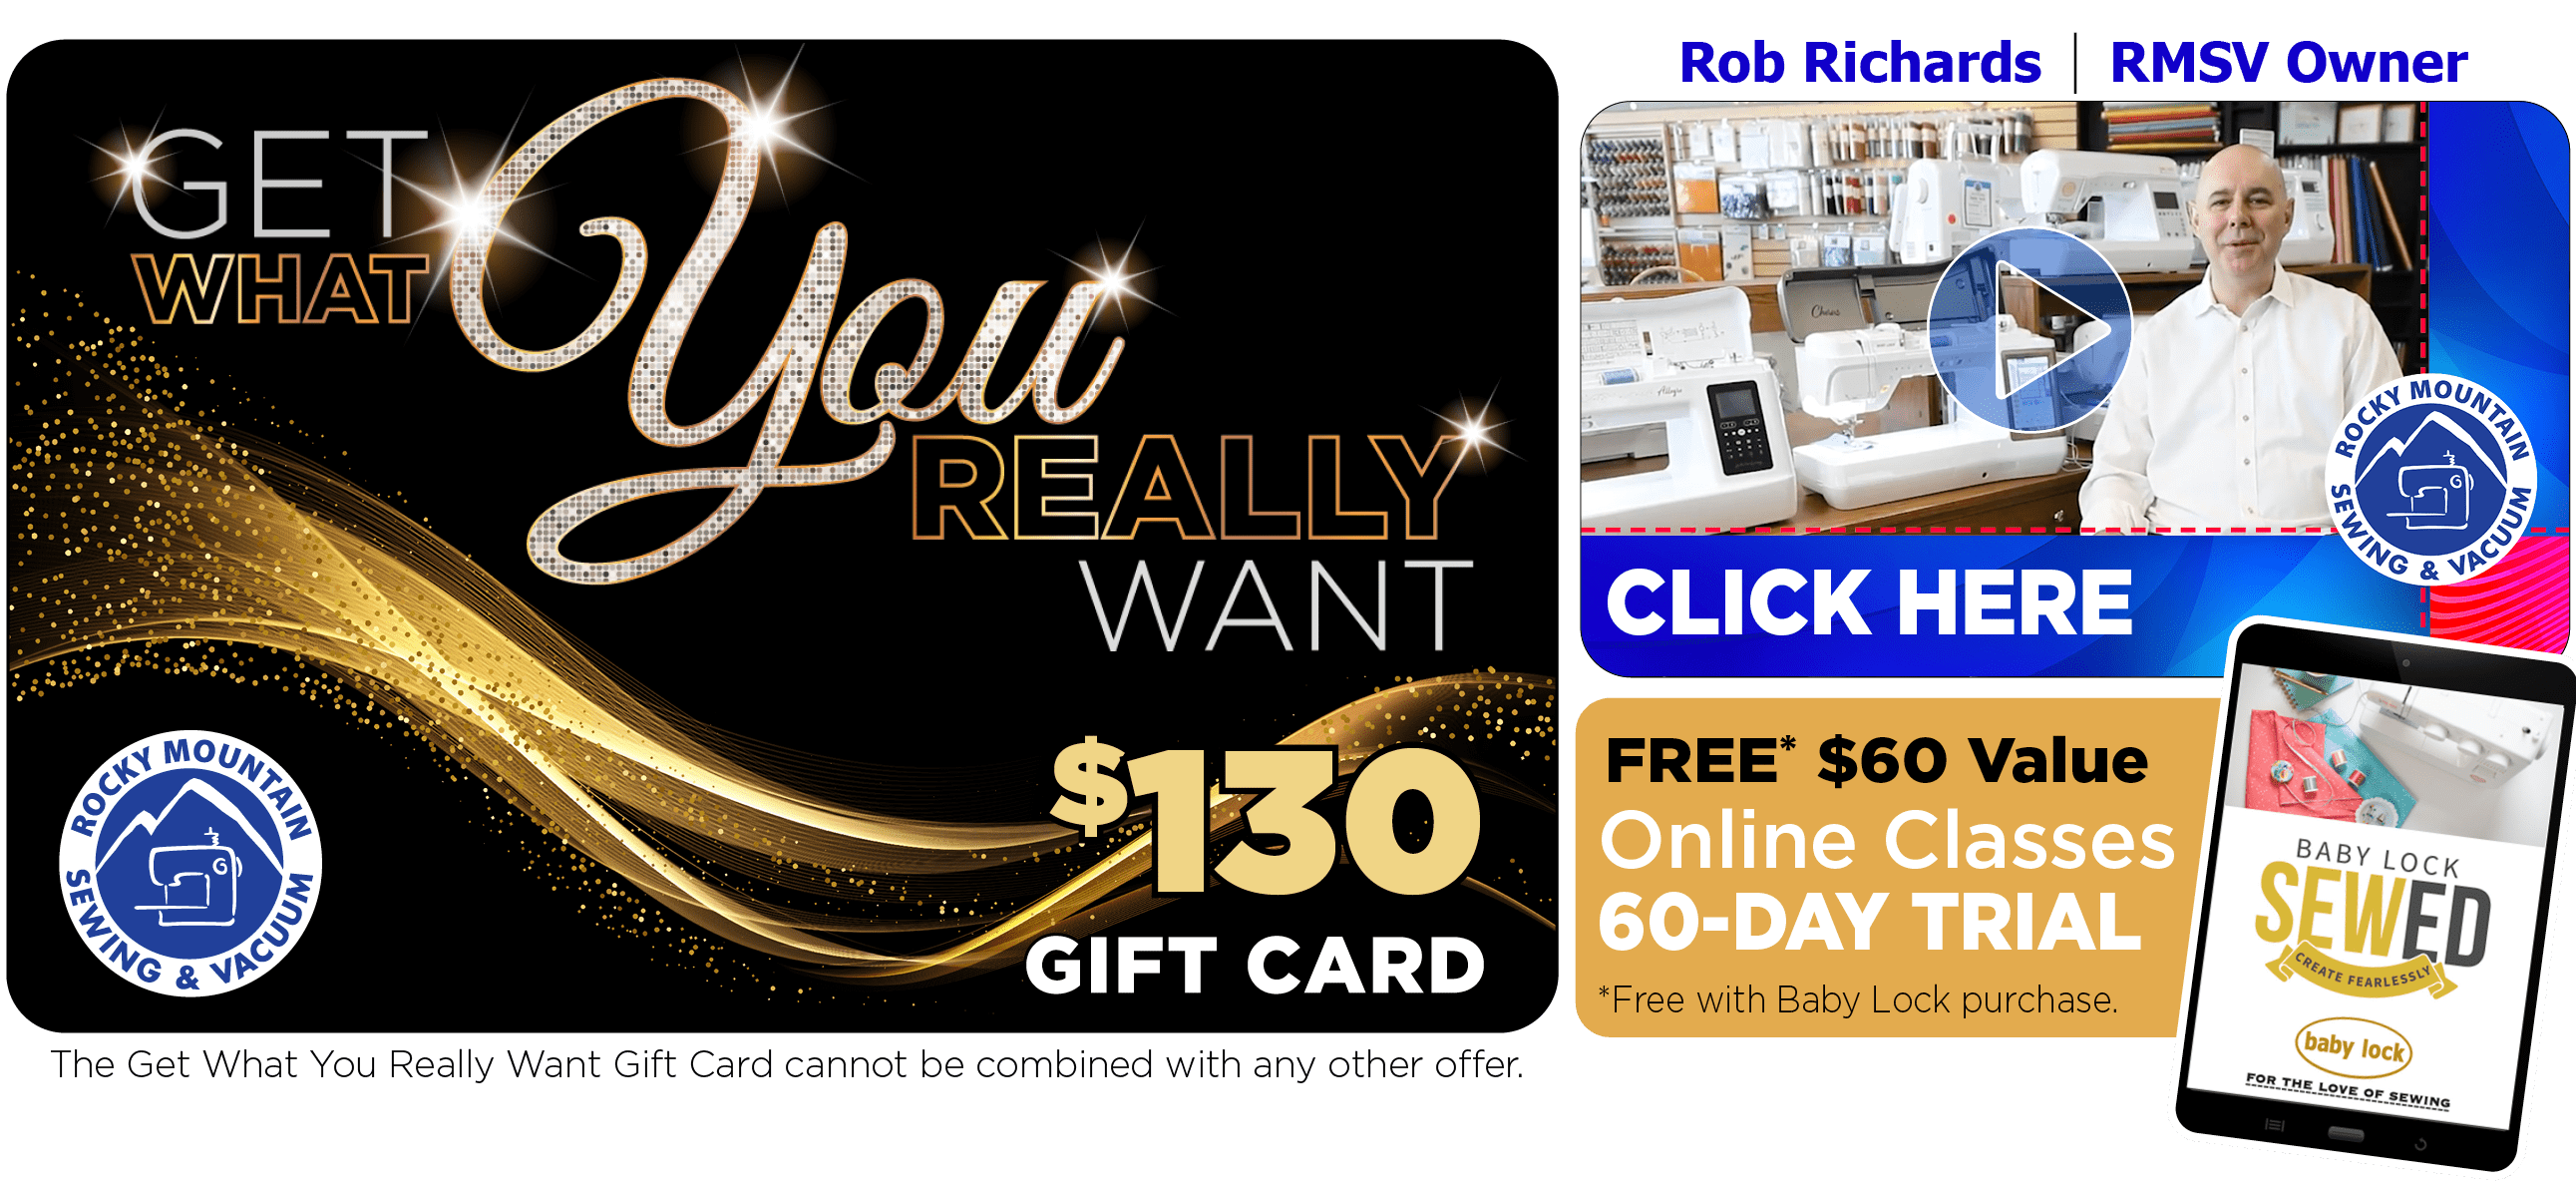 Get What You Really Want $130 Gift Card with Purchase